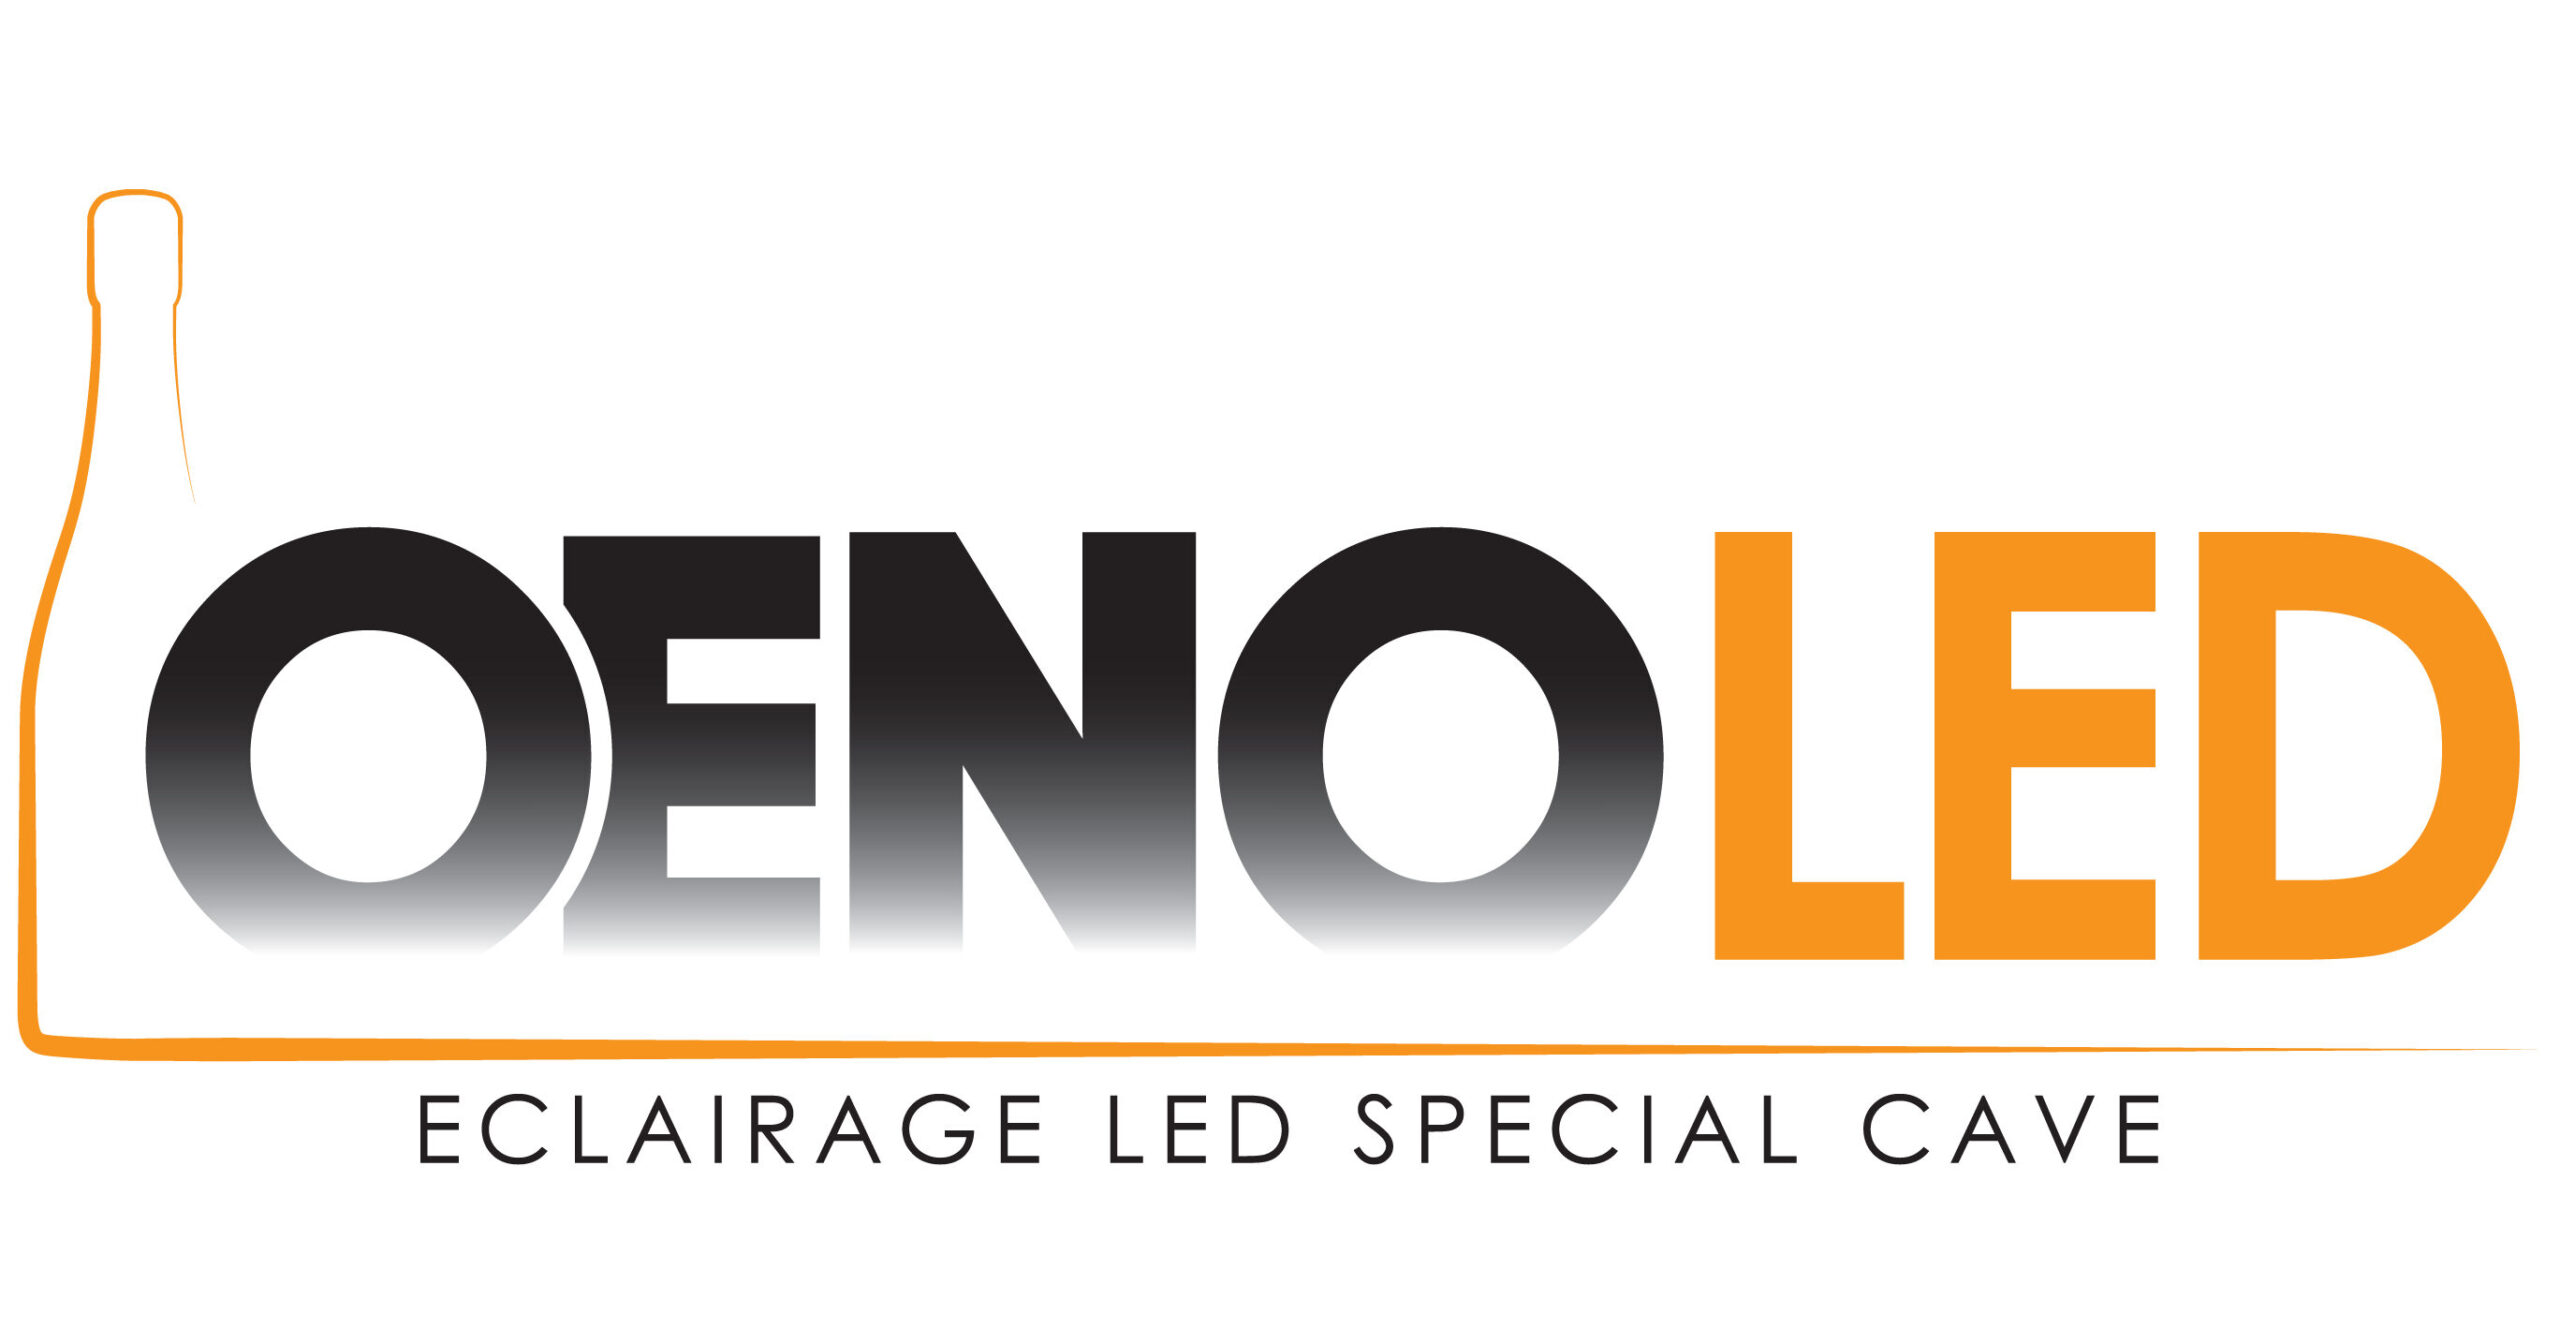 OENOLED-LOGO-ECLAIRAGE-LED-SPECIAL-CAVE